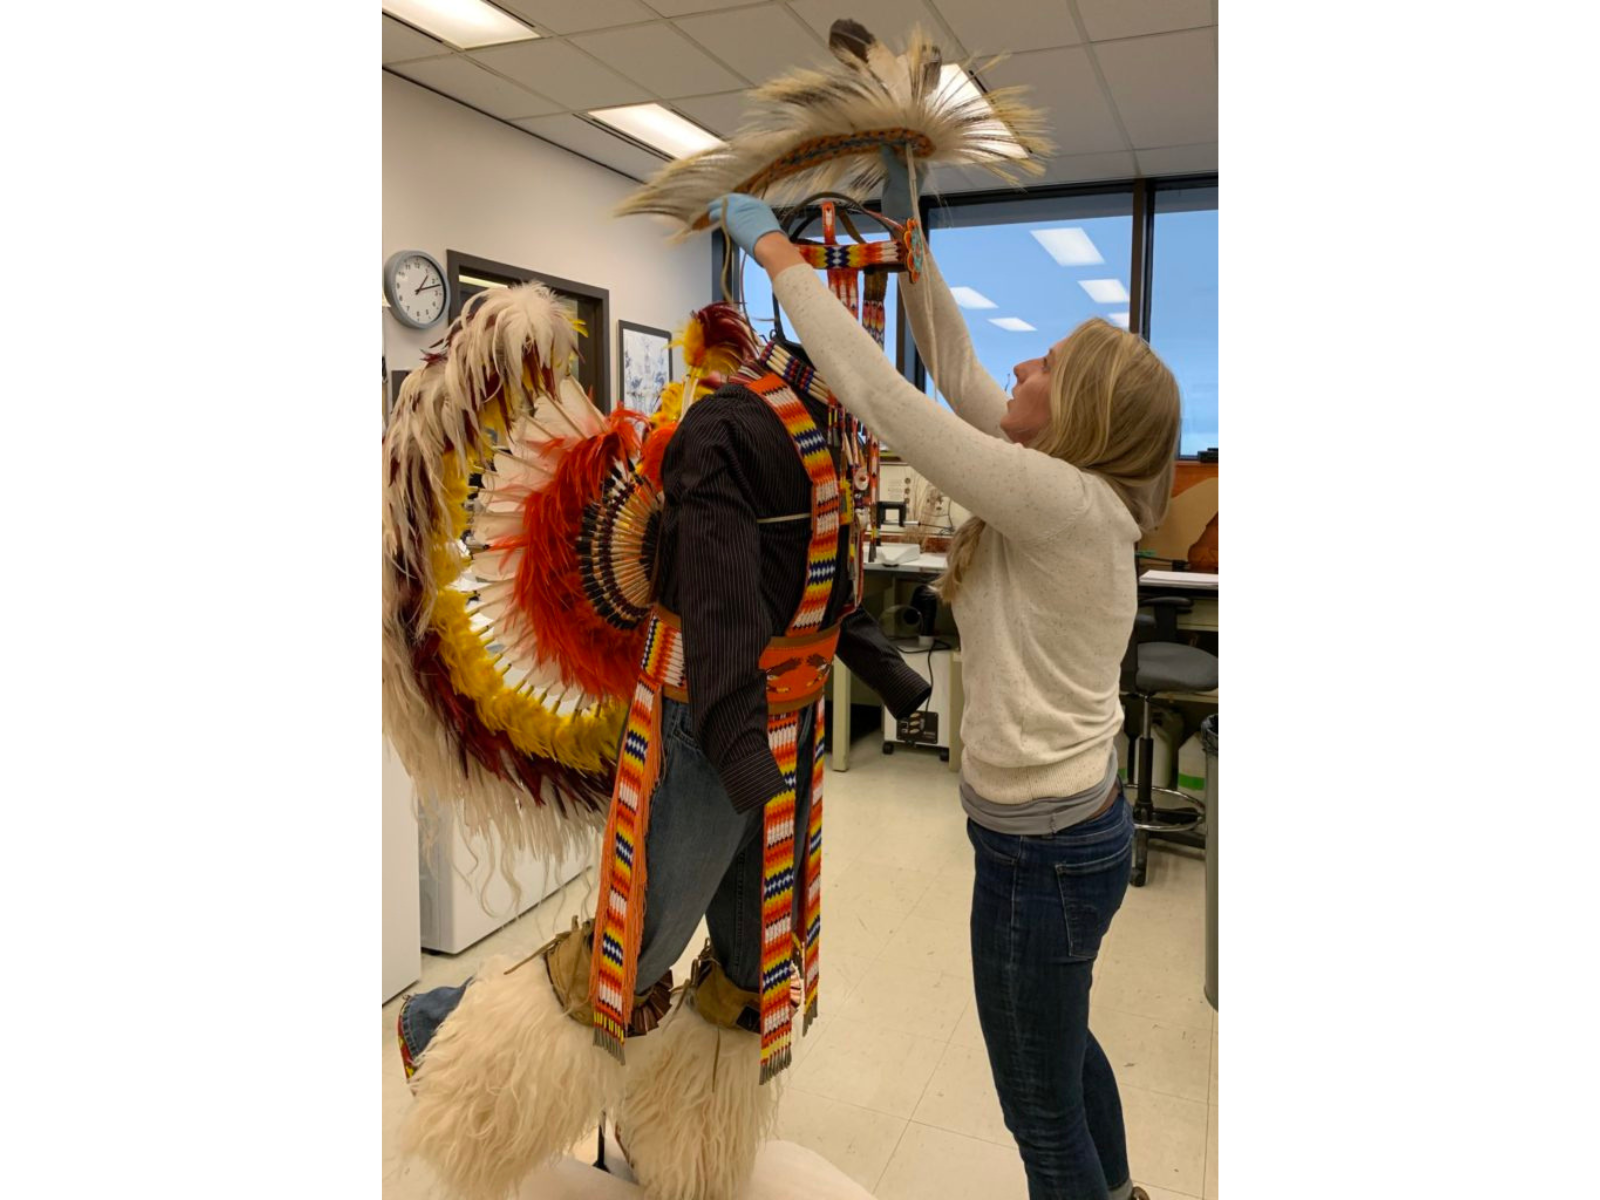 Conservator Carolyn Sirett adjusts the headdress of Pow Wow regalia on a mannequin in the conservation lab.